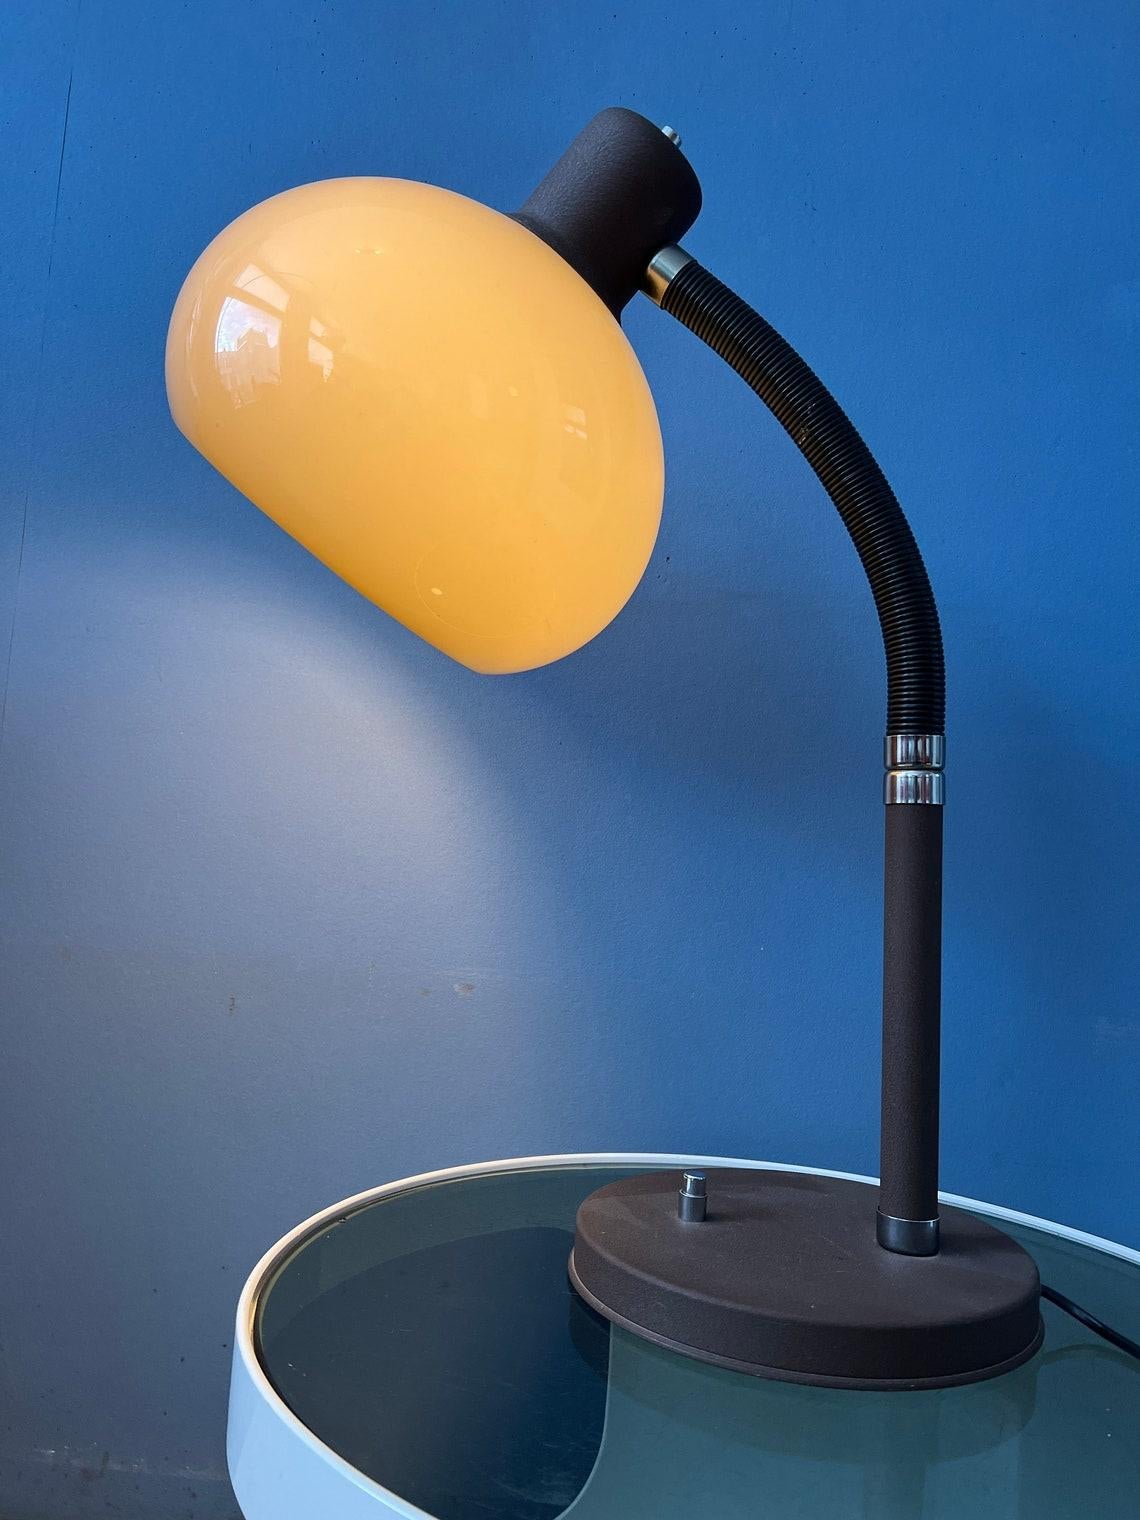 A very flexible mushroom table lamp by Herda. The acryllic mushroom shade produces a warm light. This model has a flexible, movable arm that can be turned in any direction. The switch is located on the base. The lamp requires an E27 lighting bulb